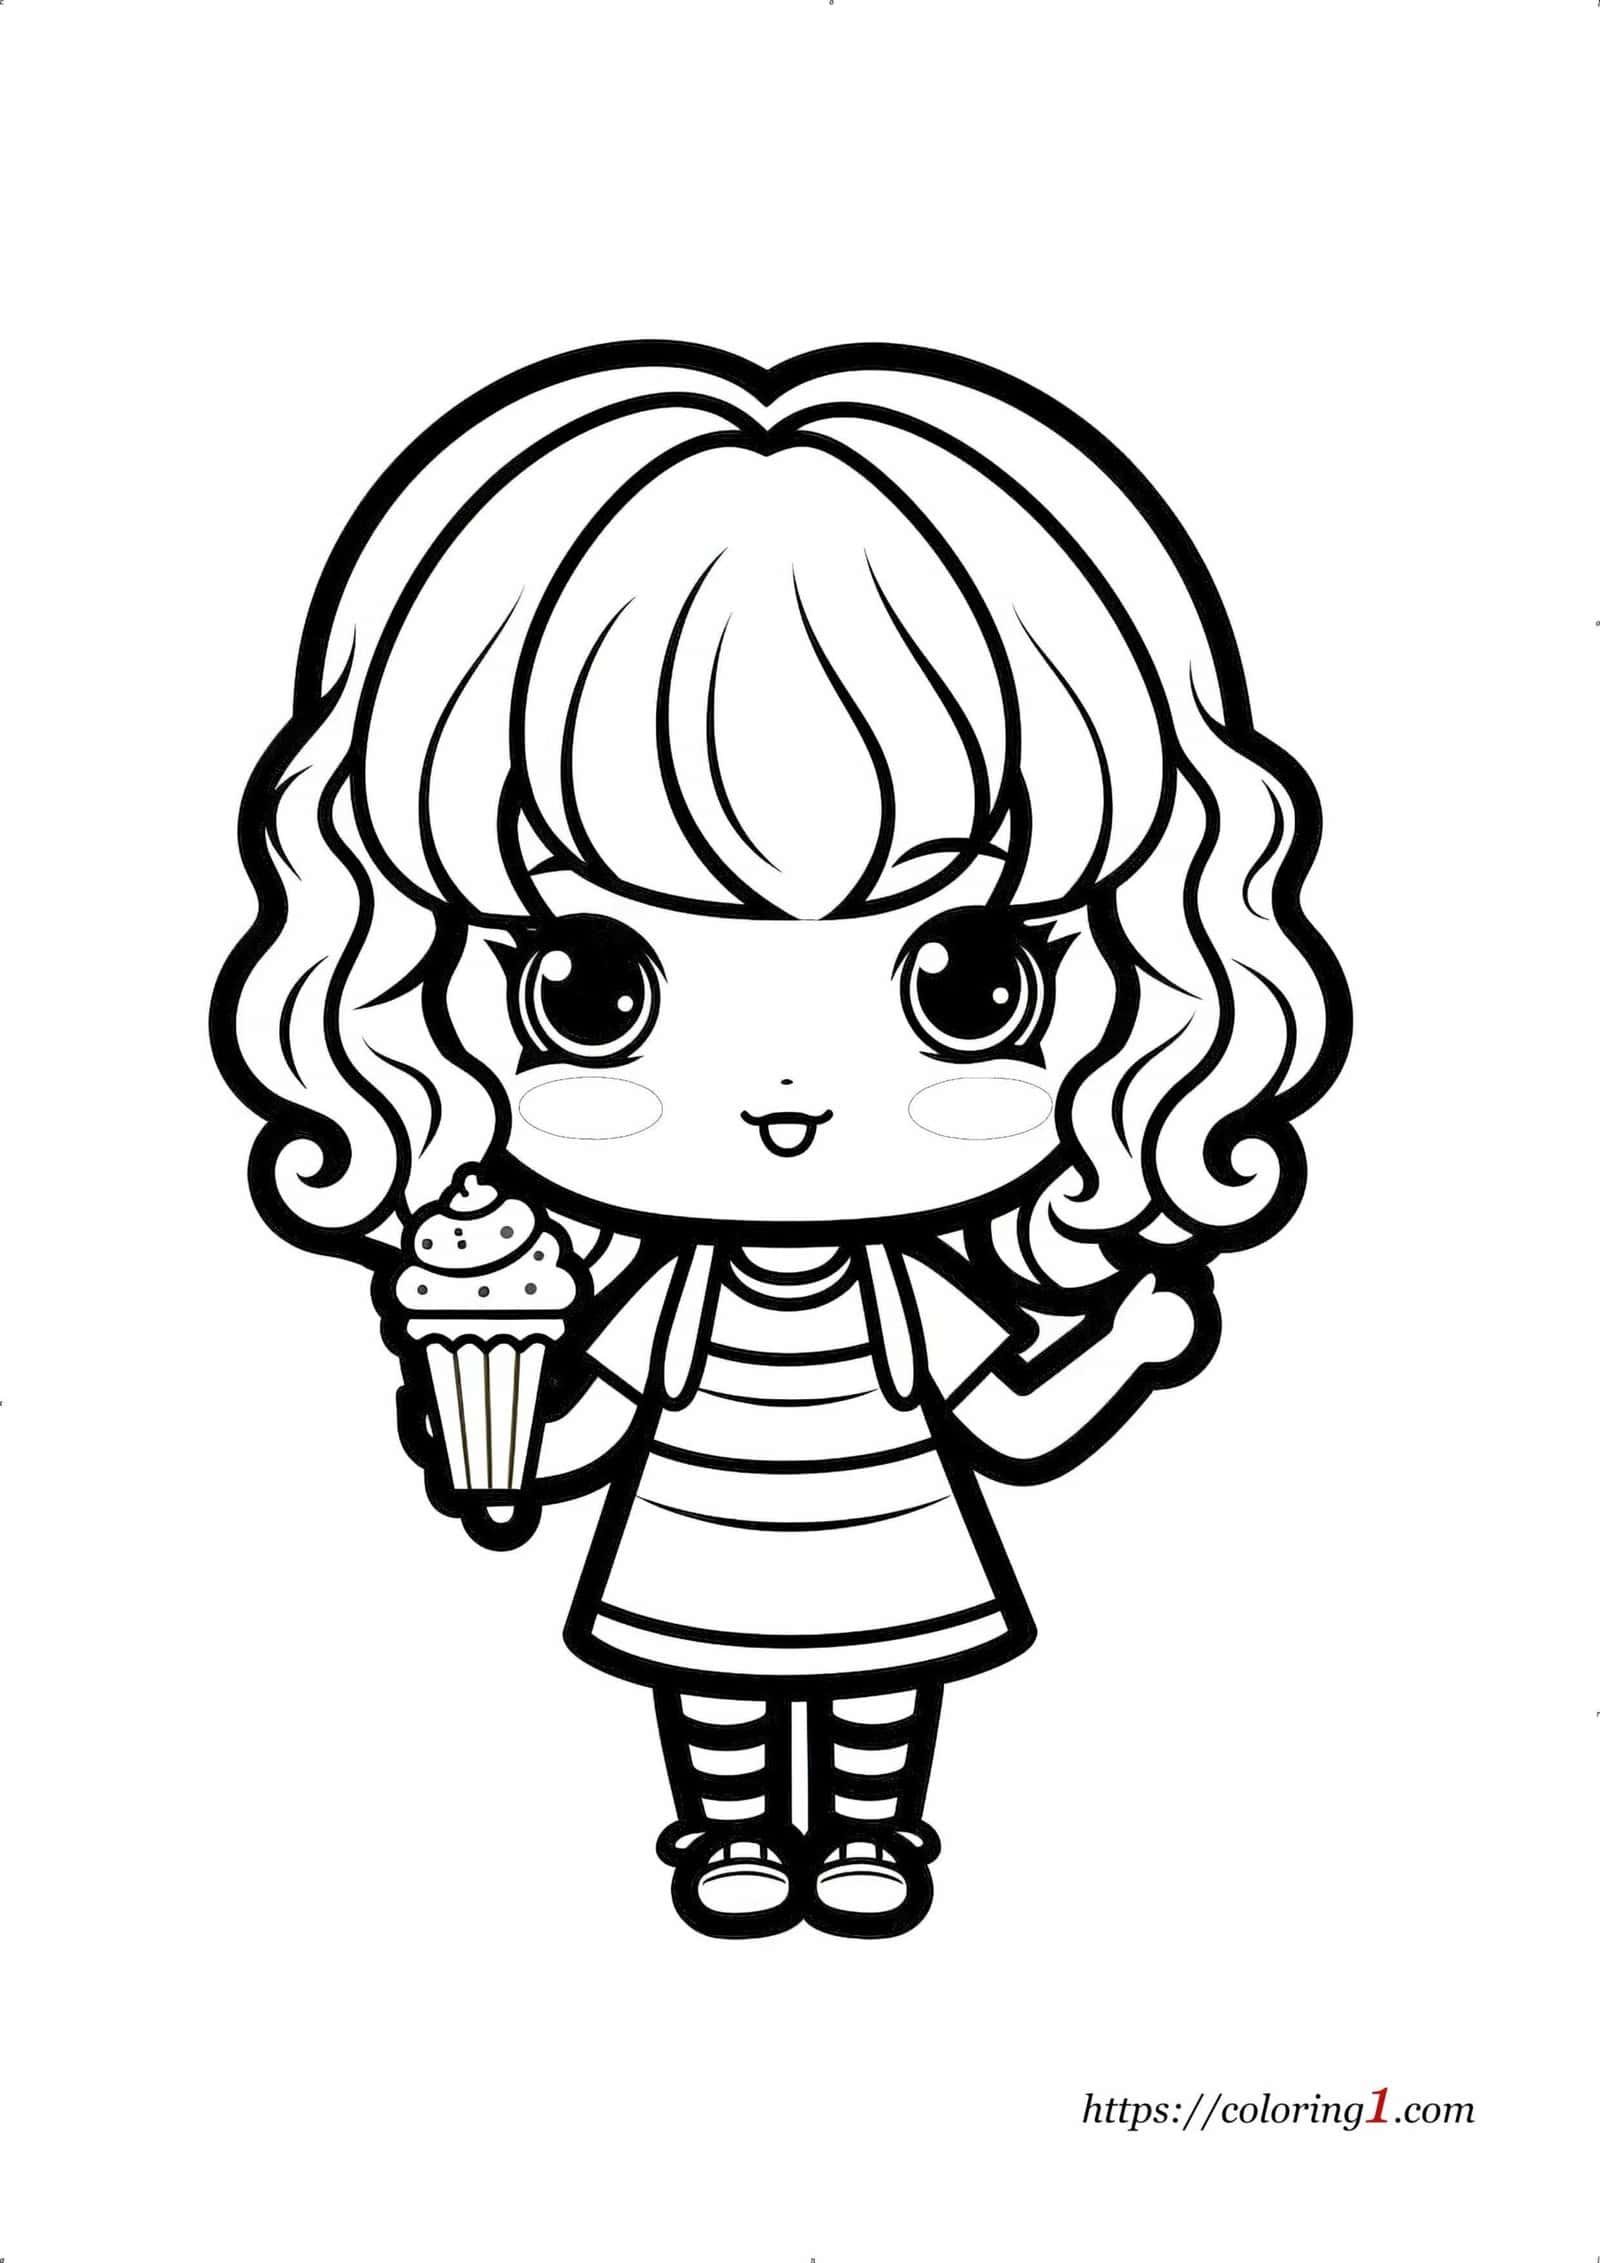 Girl And Ice Cream coloring page black and white